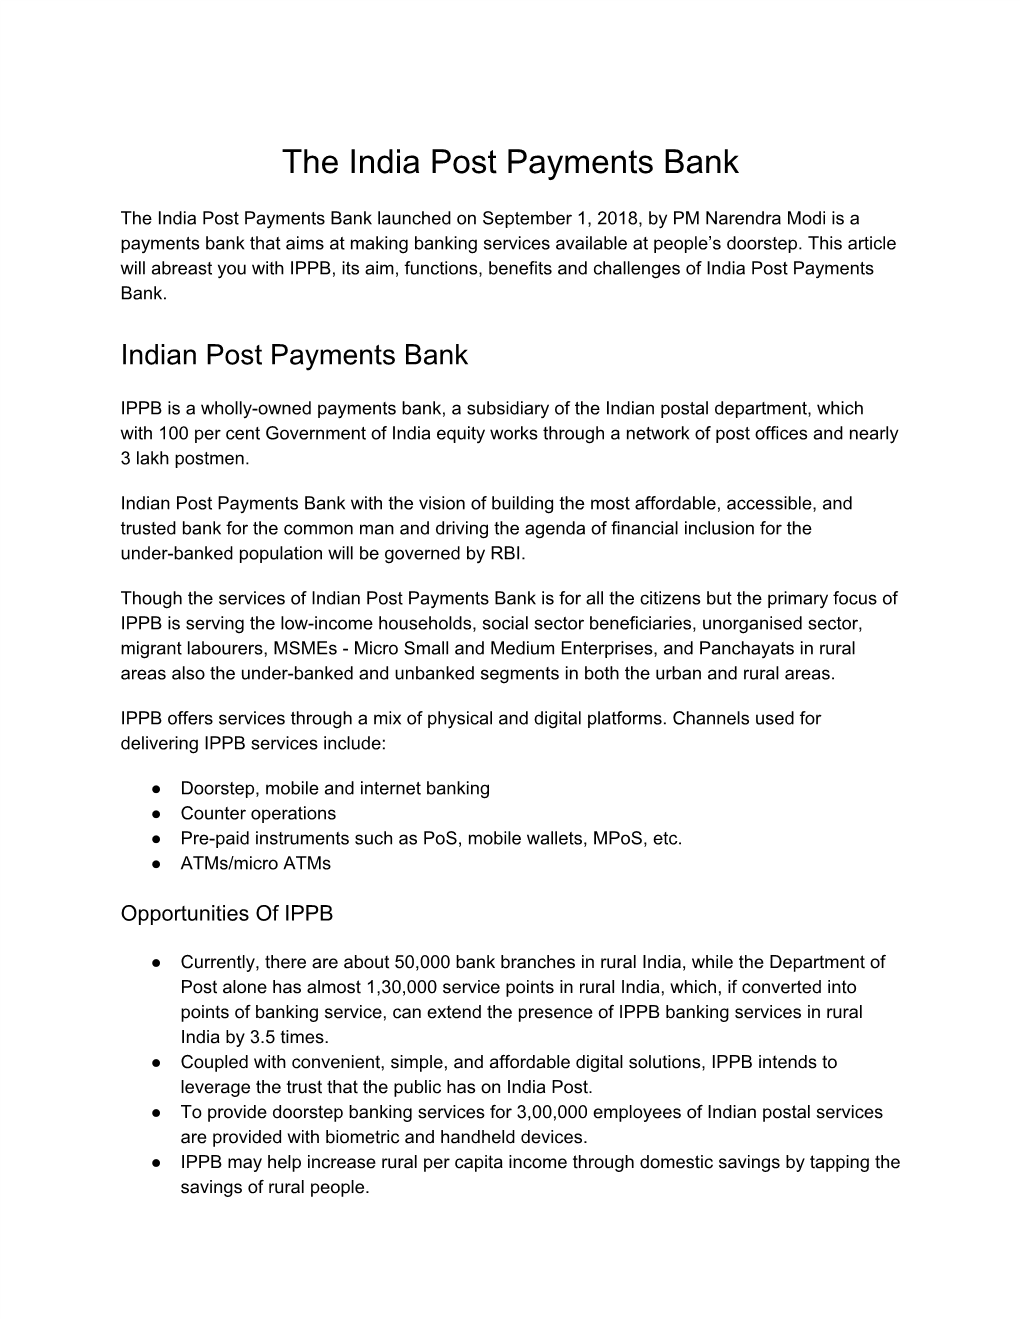 The India Post Payments Bank